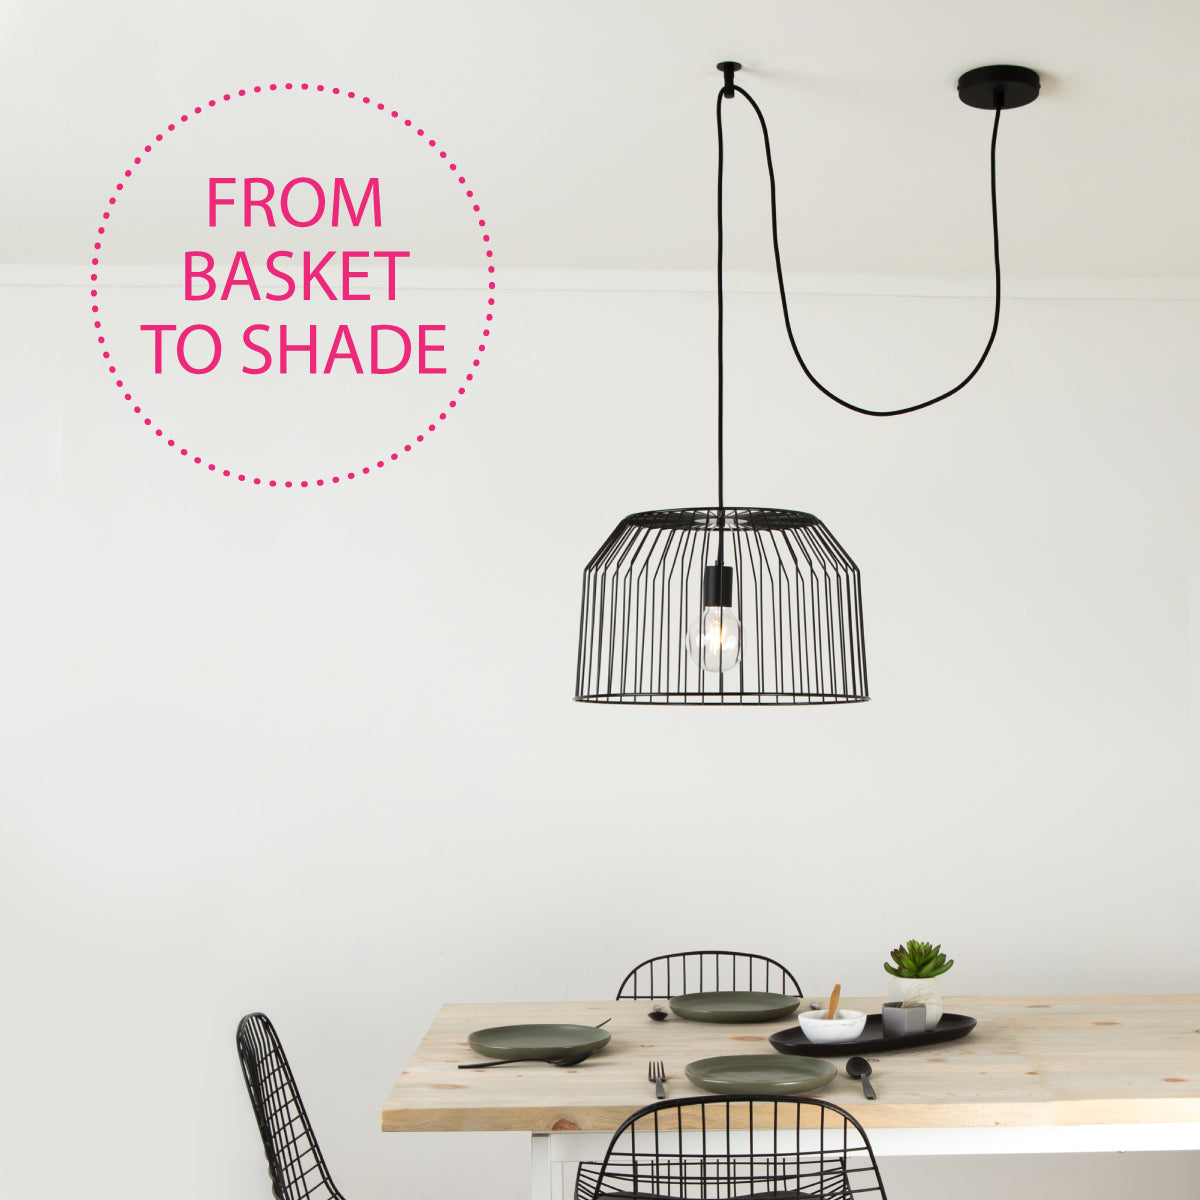 Black pendant light with wire basket shade image